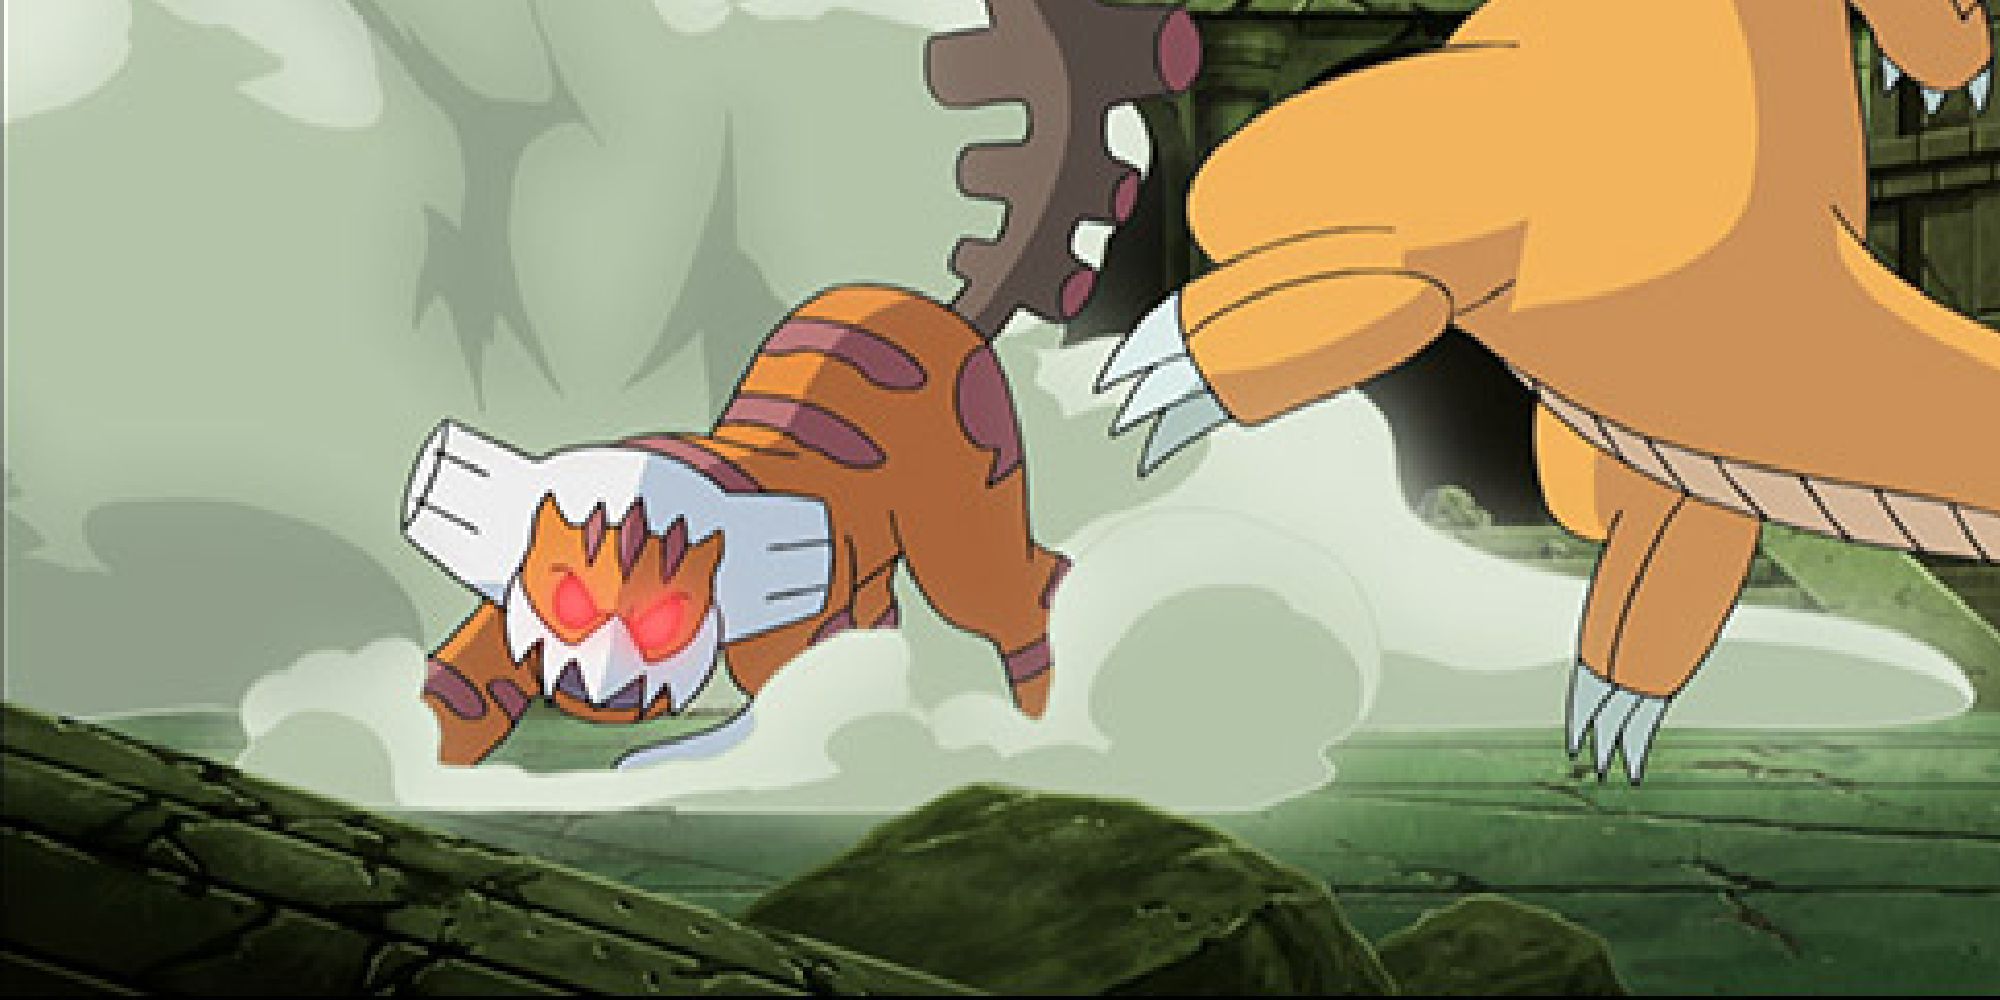 Landorus-Therian fighting a Dragonite in the anime